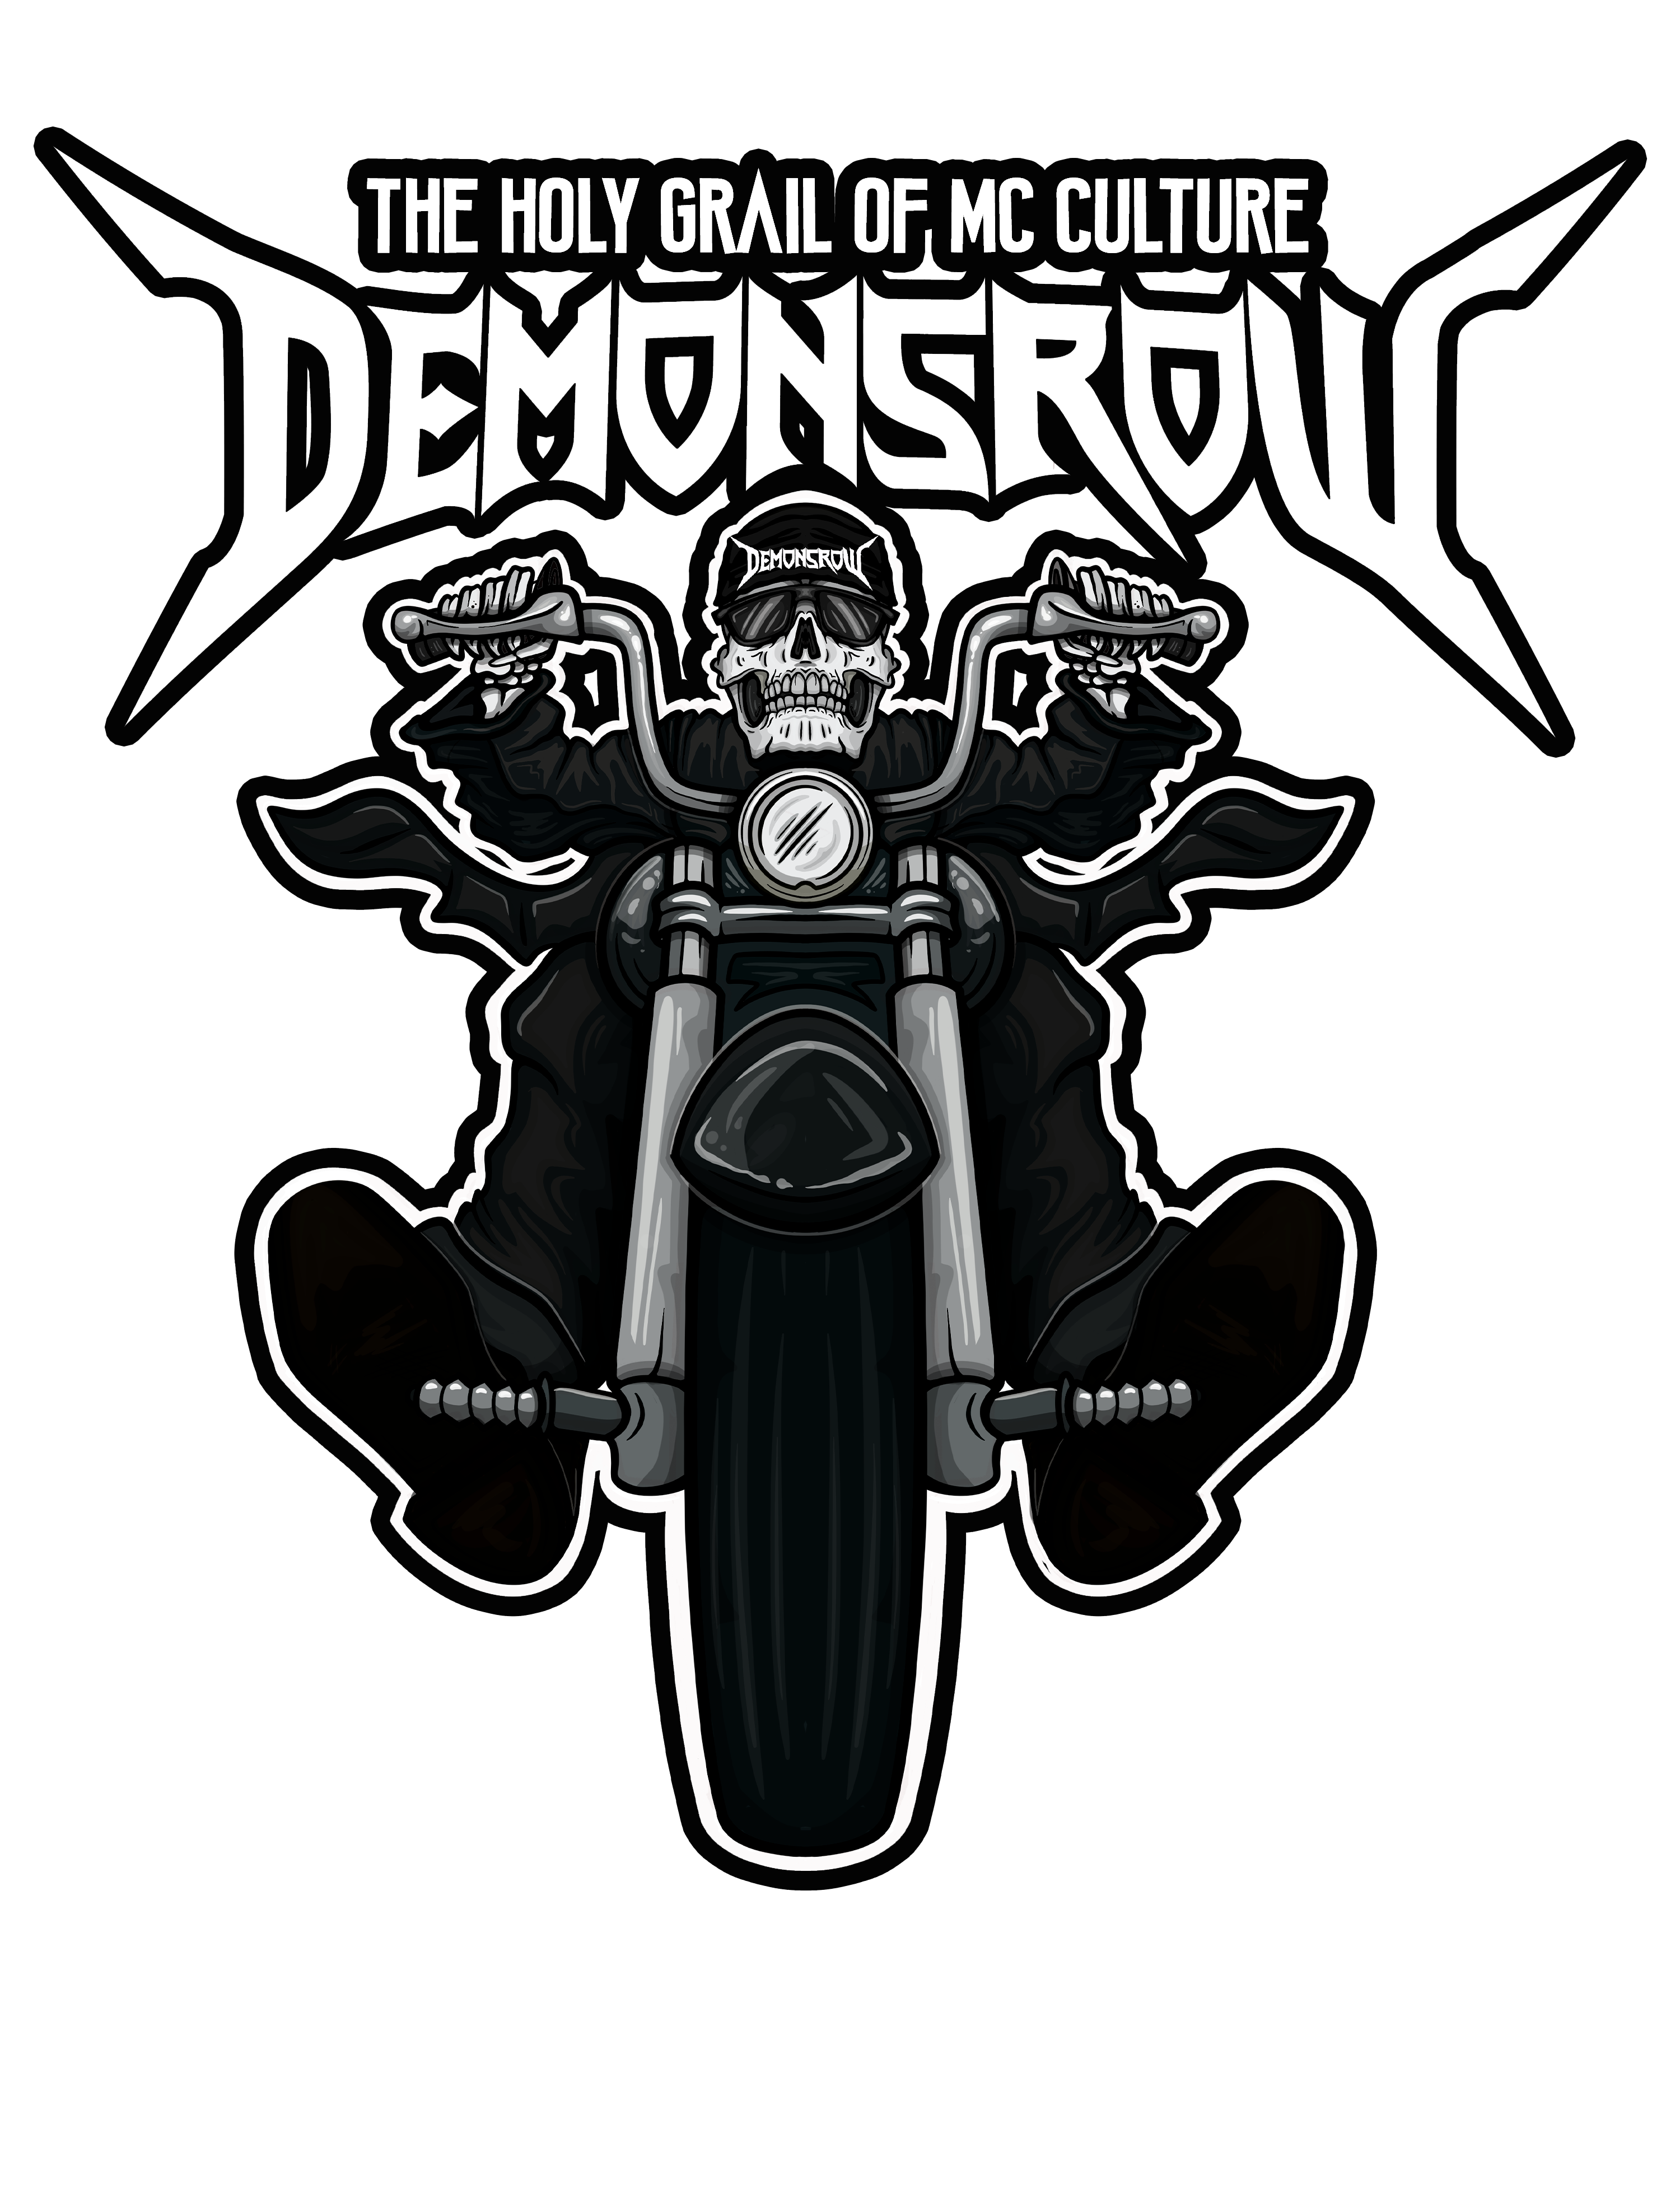 Demons Row Podcast Brings Fans Inside Motorcycle Club Culture